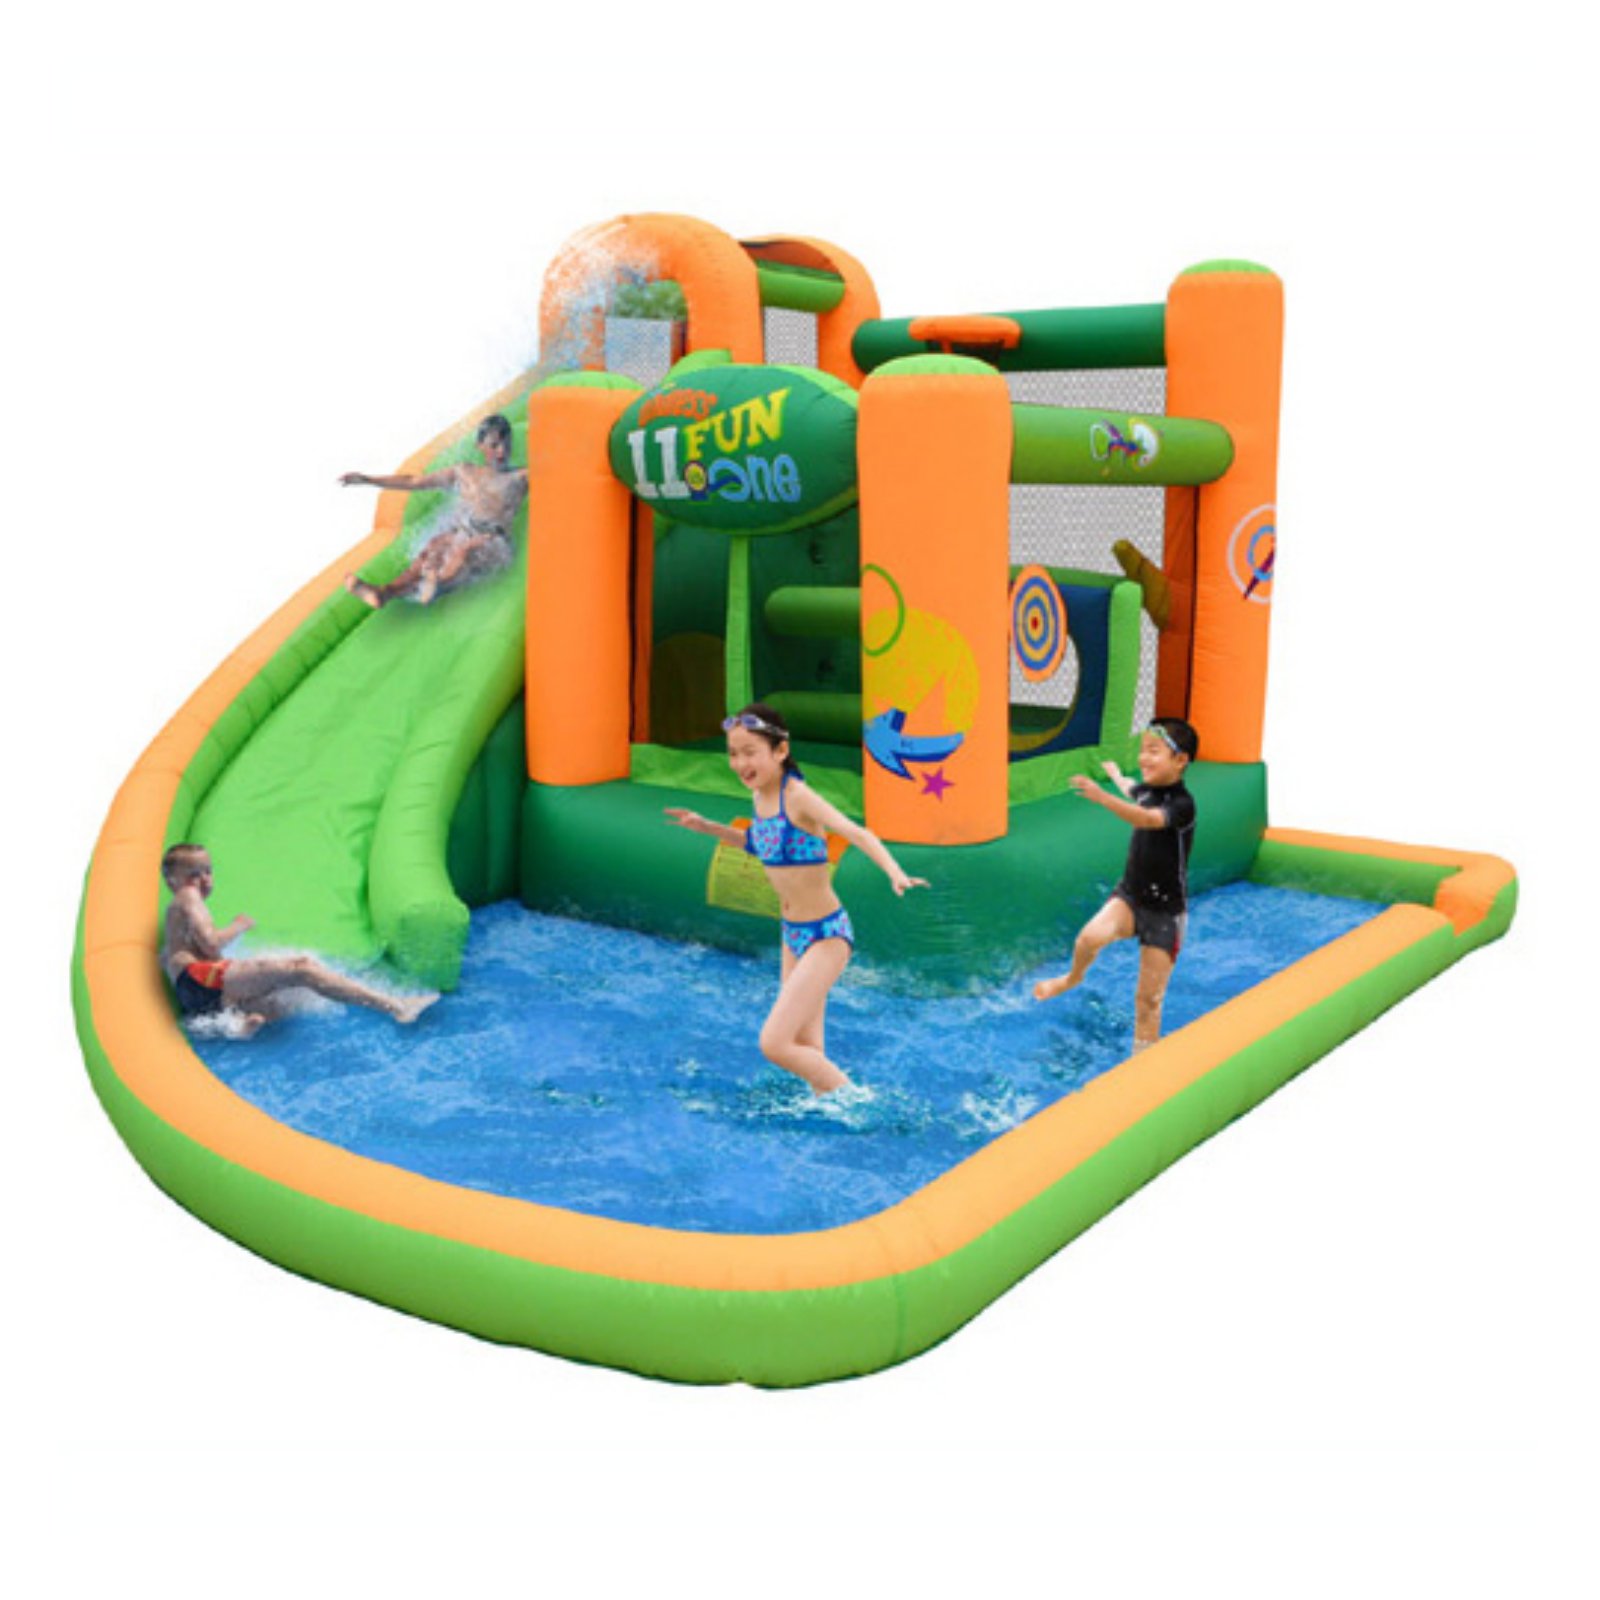 Kidwise Endless Fun 11 in 1 Inflatable Bounce House and Water Slide Combo - image 1 of 1